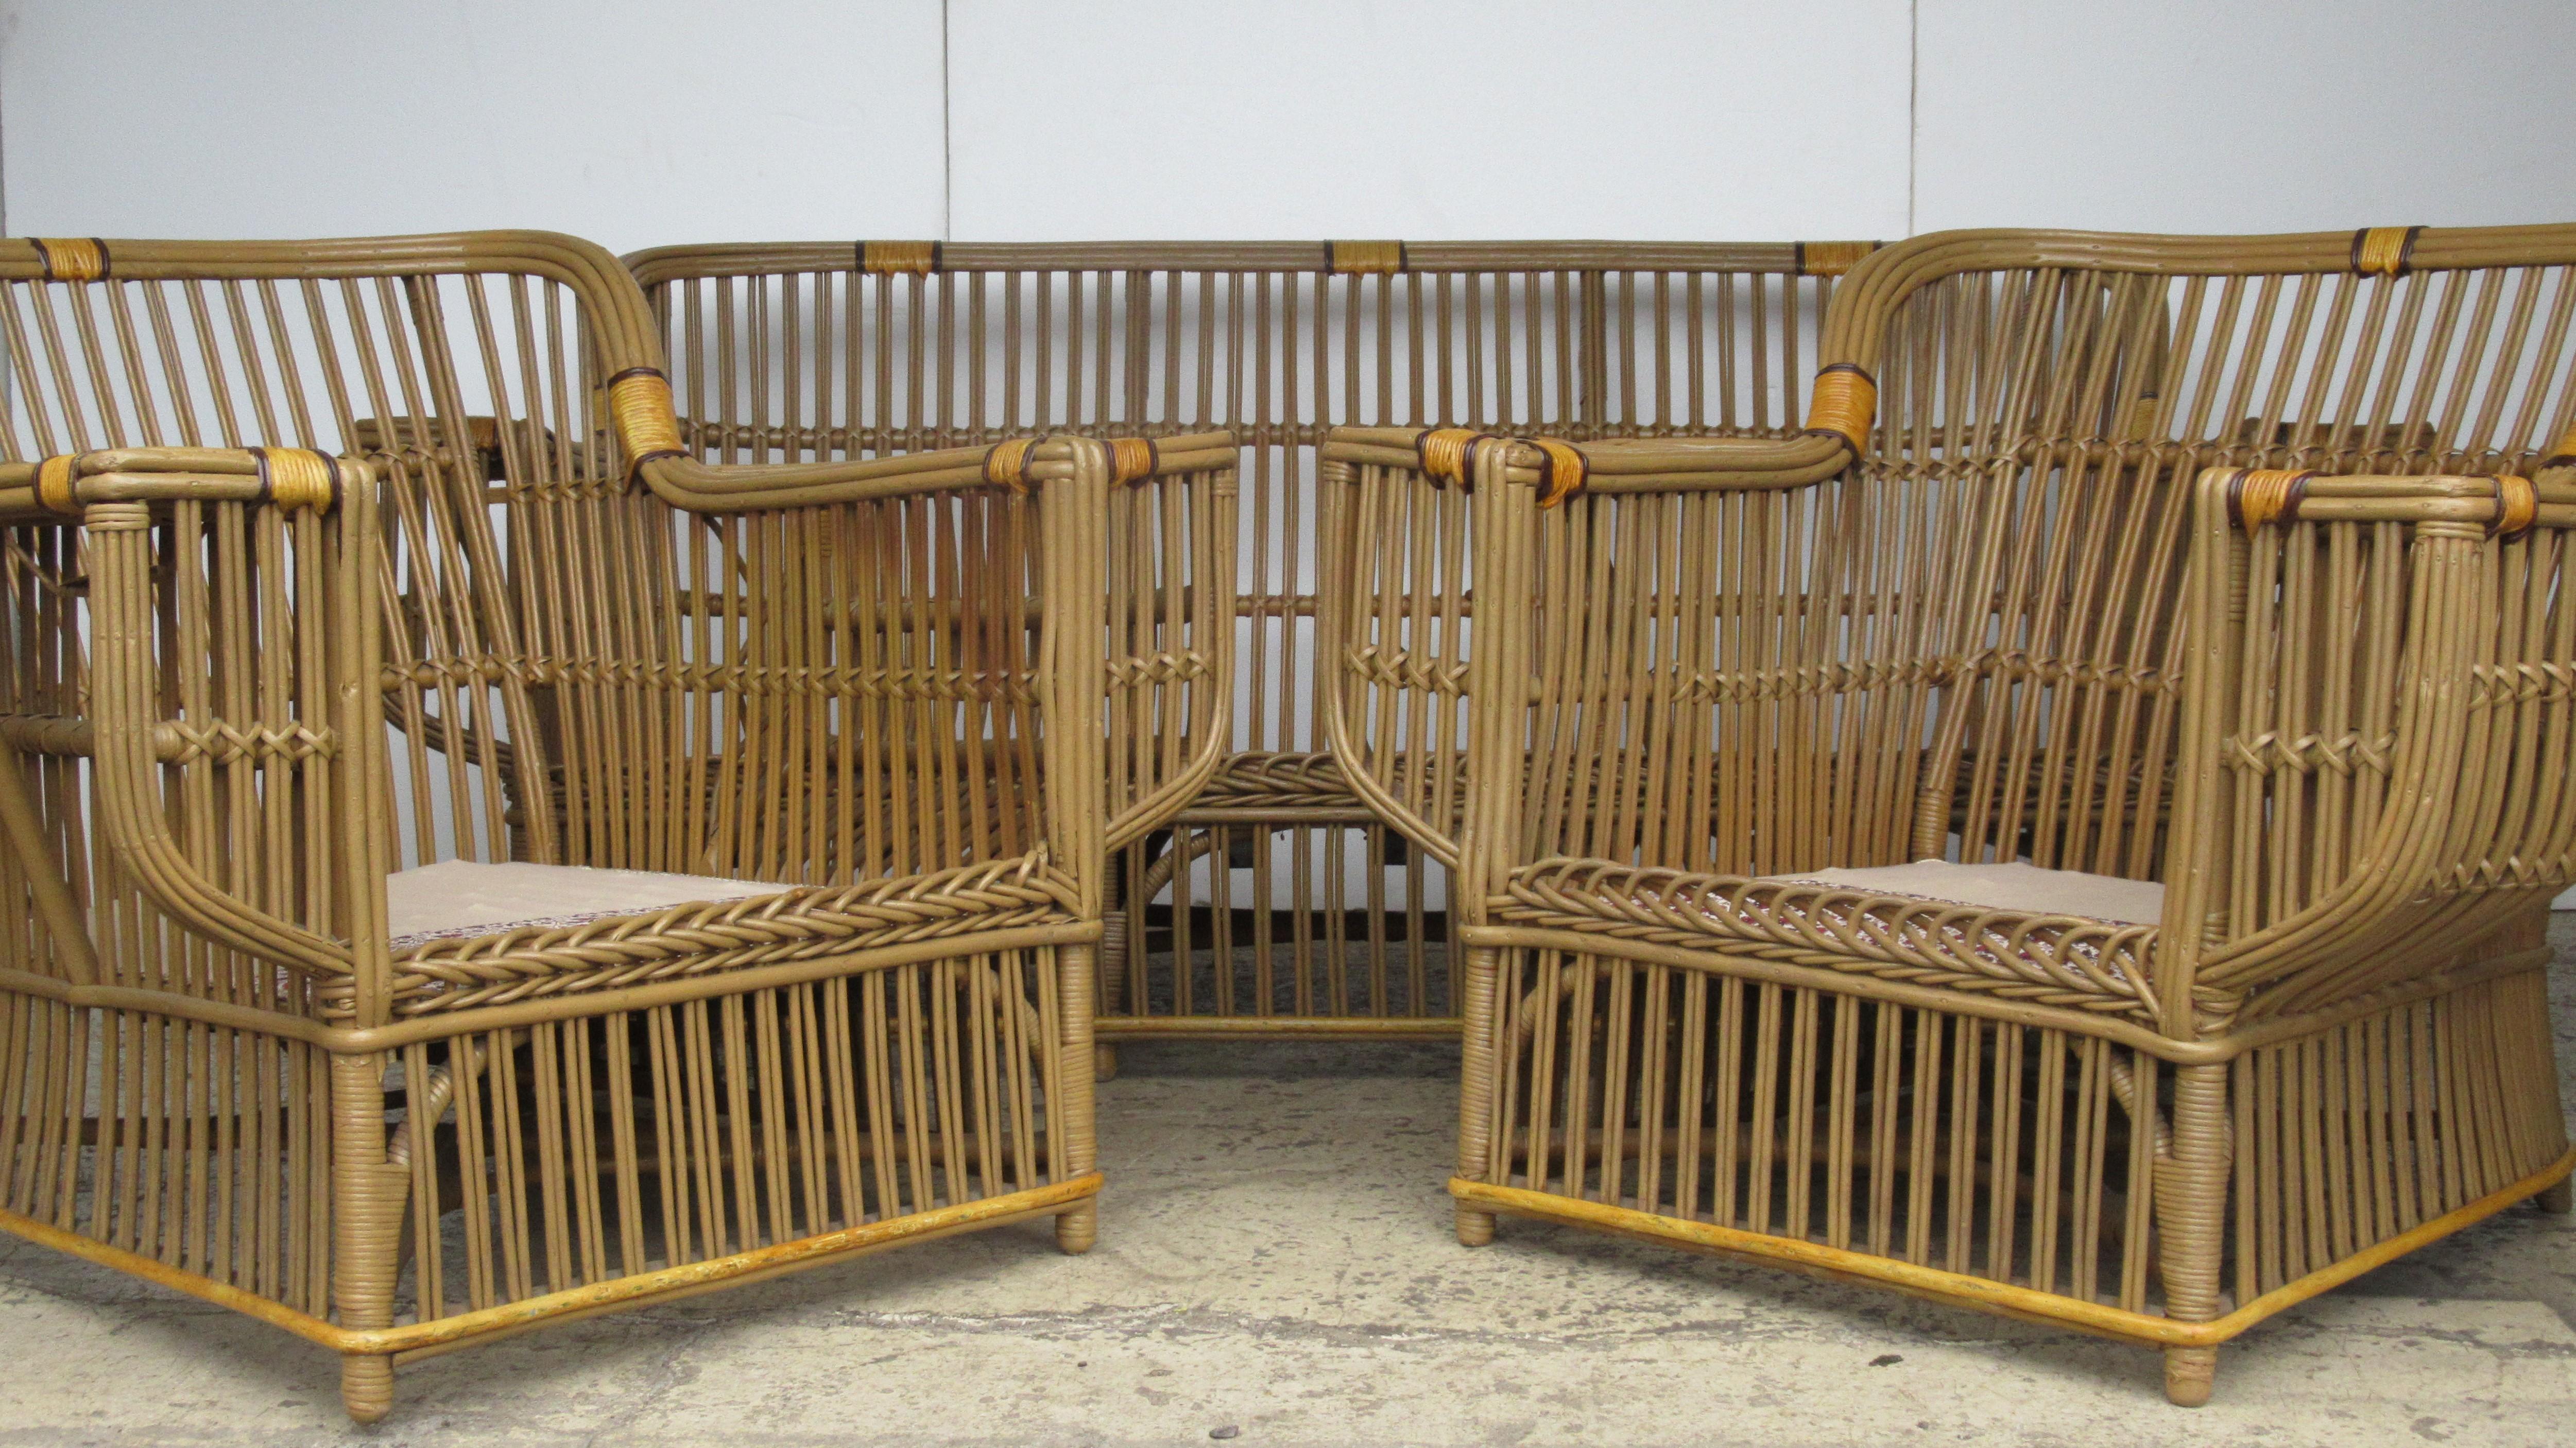 A fully matched set of classic 1930s American Art Deco stick wicker furniture, consisting of a sofa (73